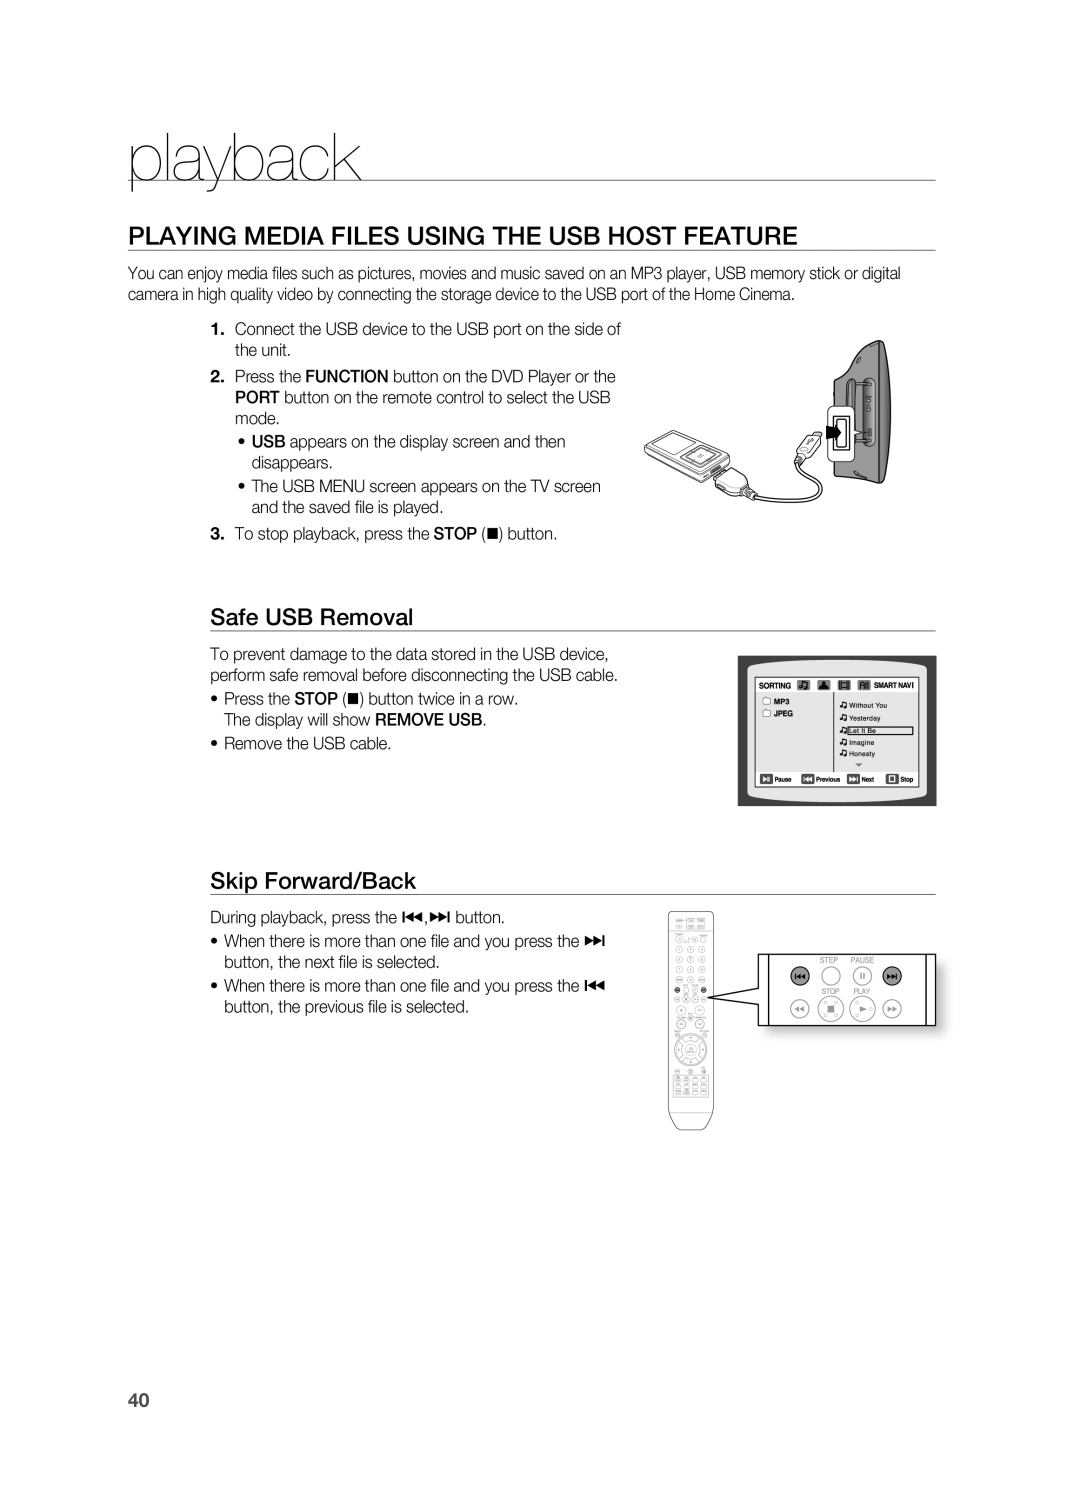 Samsung HT-X710 user manual PlAYING MEDIA FIlES USING THE USB HOST FEATUrE, Safe USB removal, playback, Skip Forward/Back 